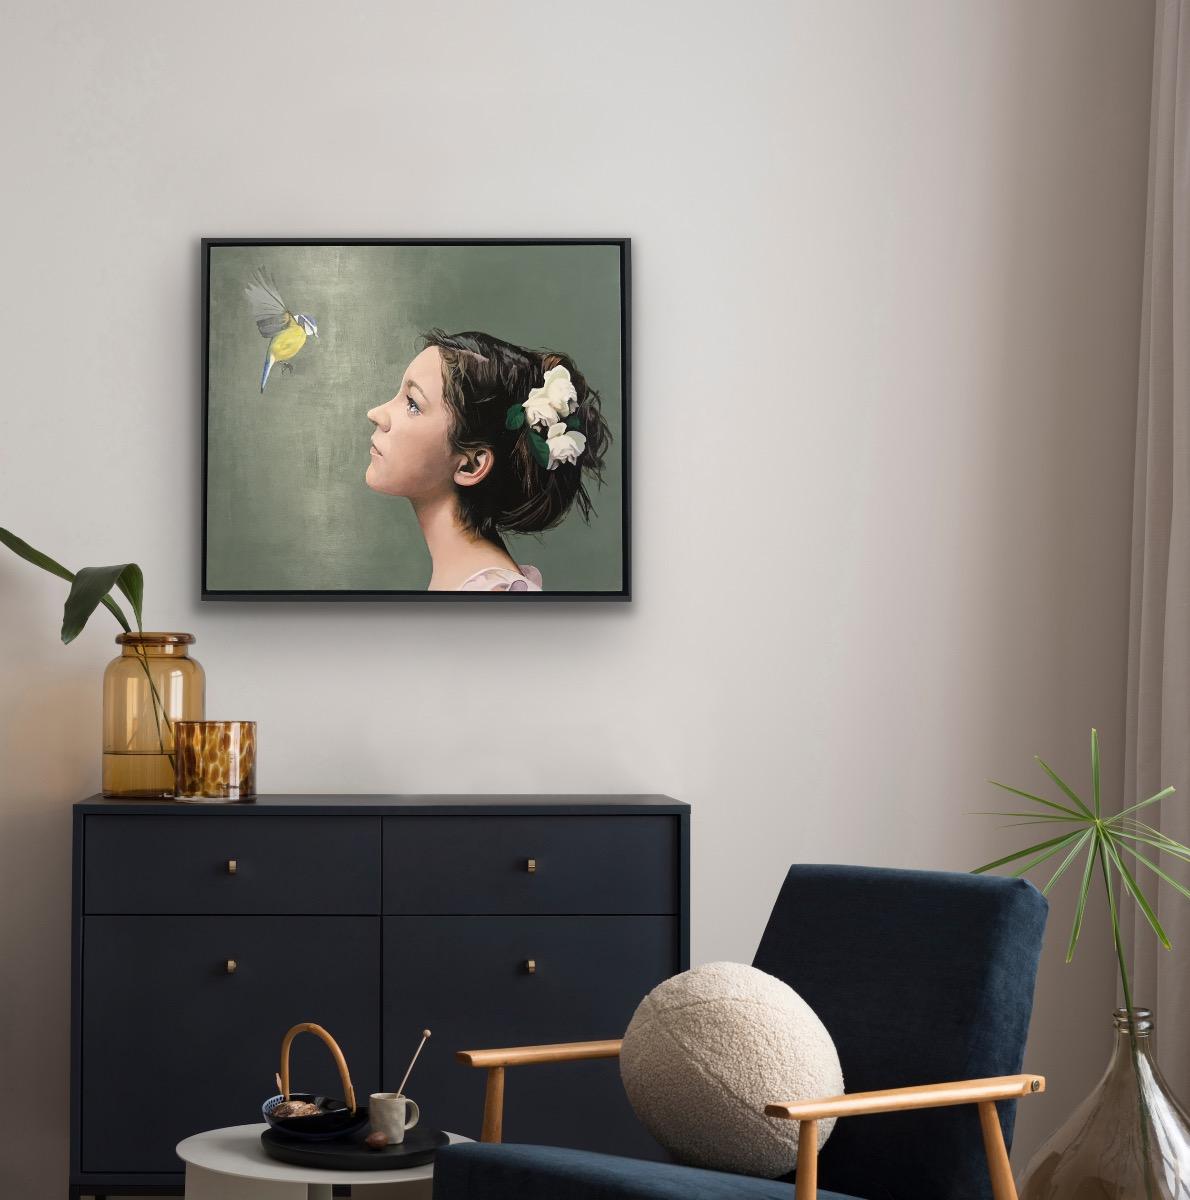 Original painting by Angela Smith showing girl enchanted by humming bird.

A portrayal of young girl with brown hair tied back by white flowers looking up to meet the gaze of a humming bird hovering slightly above.

Additional Information:
Oil on